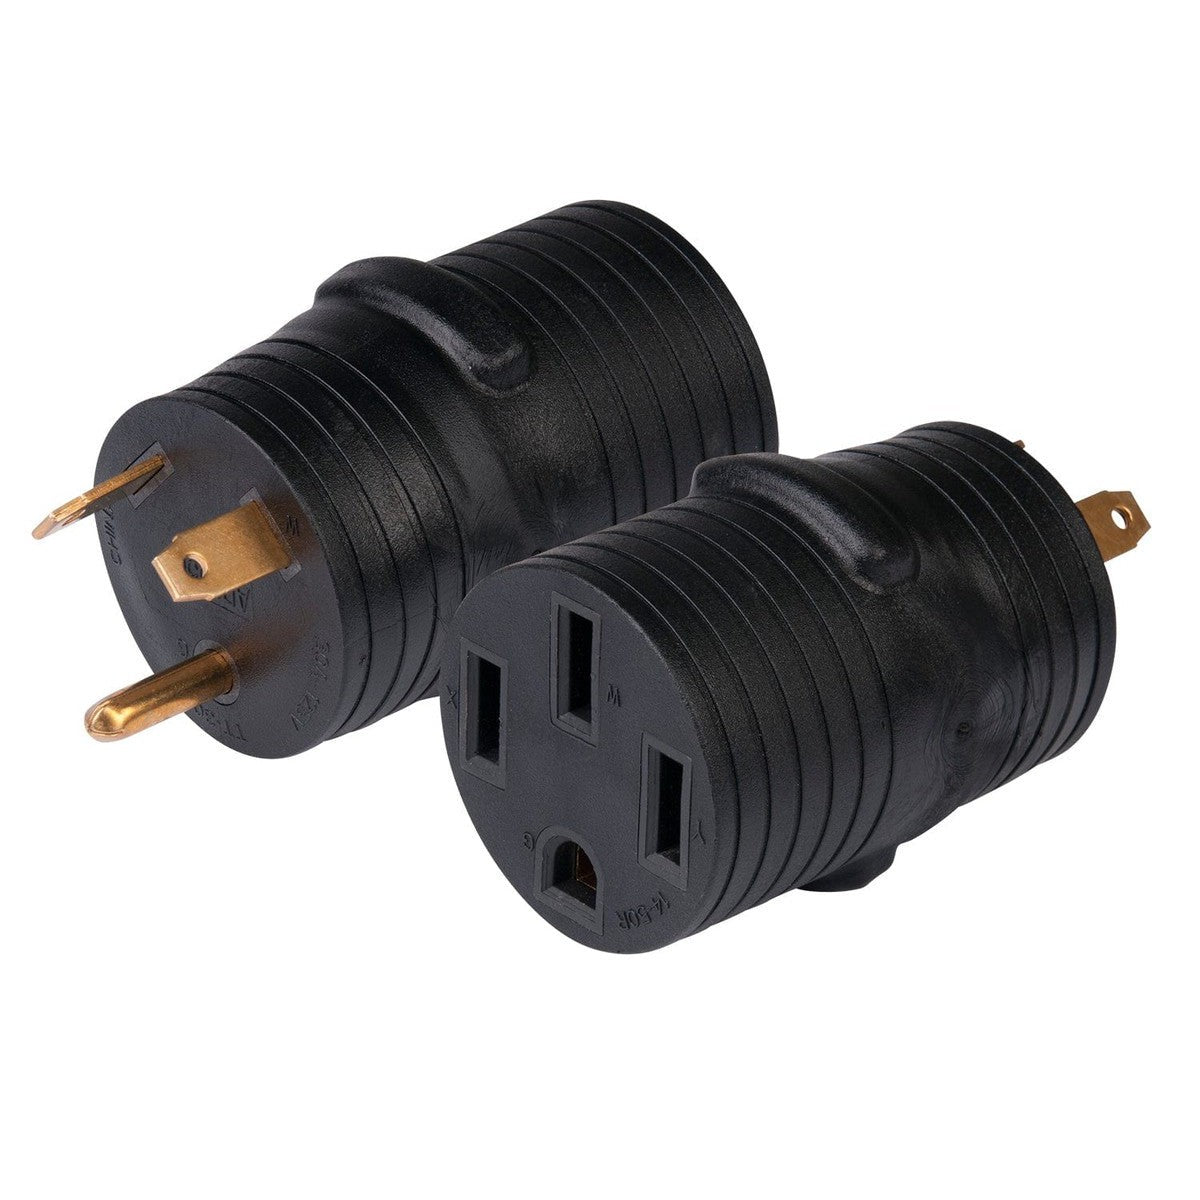 ParkPower Qualifies for Free Shipping ParkPower One-Piece Adapter 30a Male to 50a Female #3050RVSA